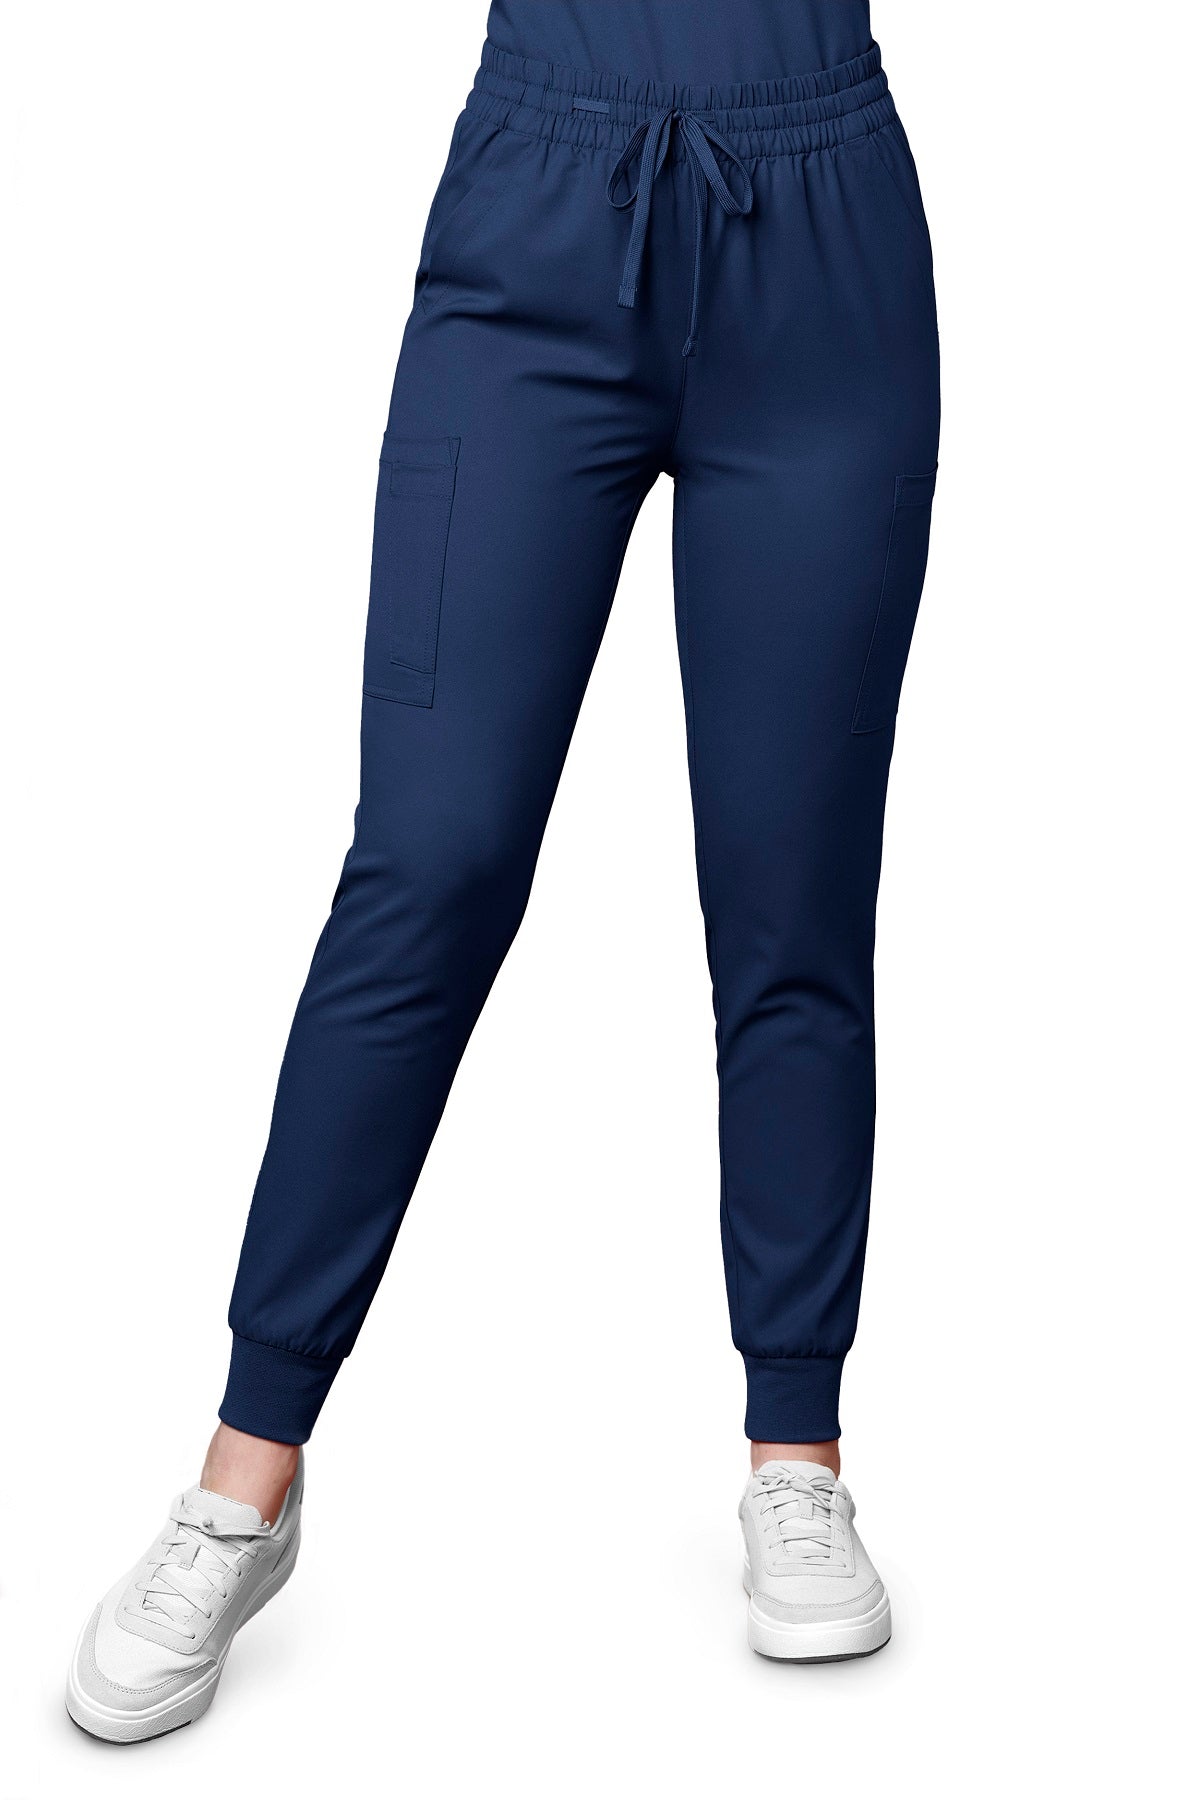 WonderWink Scrub Pants Thrive Jogger regular length in navy at Parker's Clothing and Shoes.